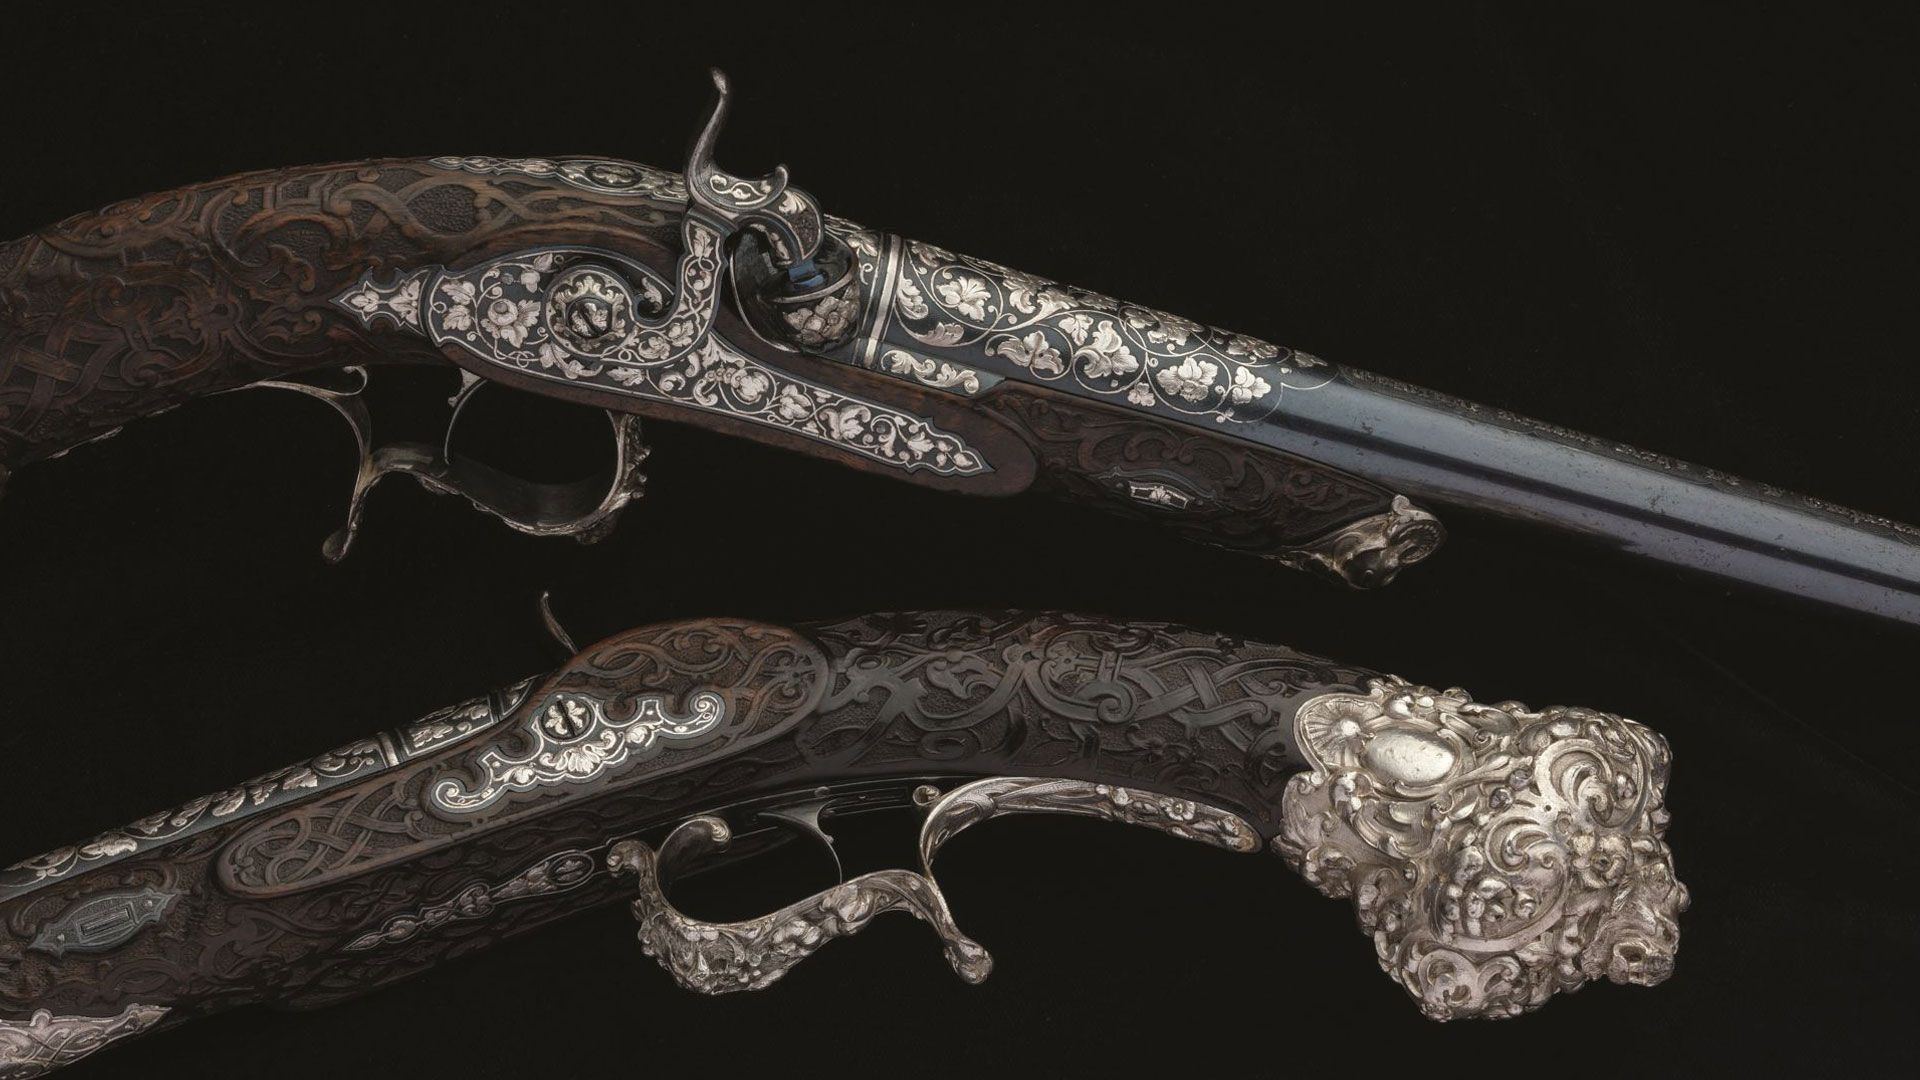 Elaborate Pair of Gastinne-Renette Percussion Pistols with Sculpted Silver Mounts and Relief Carved Stocks from the Exposition Universelle of 1855